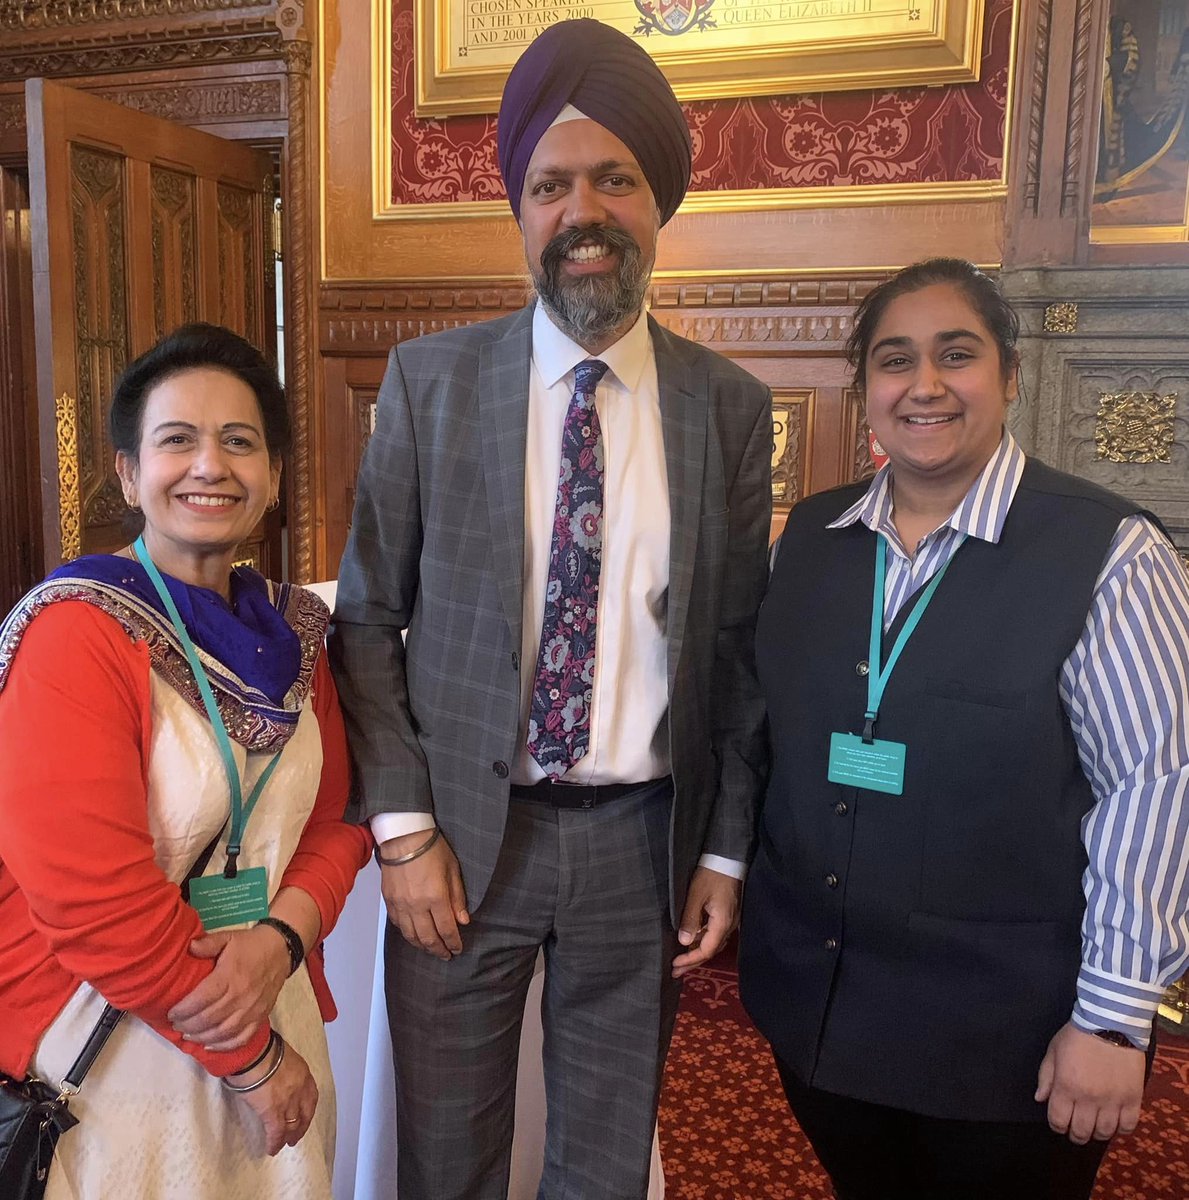 #Vaisakhi celebrations at Westminster 2024. Fortunate to join 2 remarkable #historymakers who represent Sikhs across the world. First female Sikh MP @PreetKGillMP who continues inspiring me through her work, achievements & breaking barriers & first turban wearing MP @TanDhesi 🙏🏼